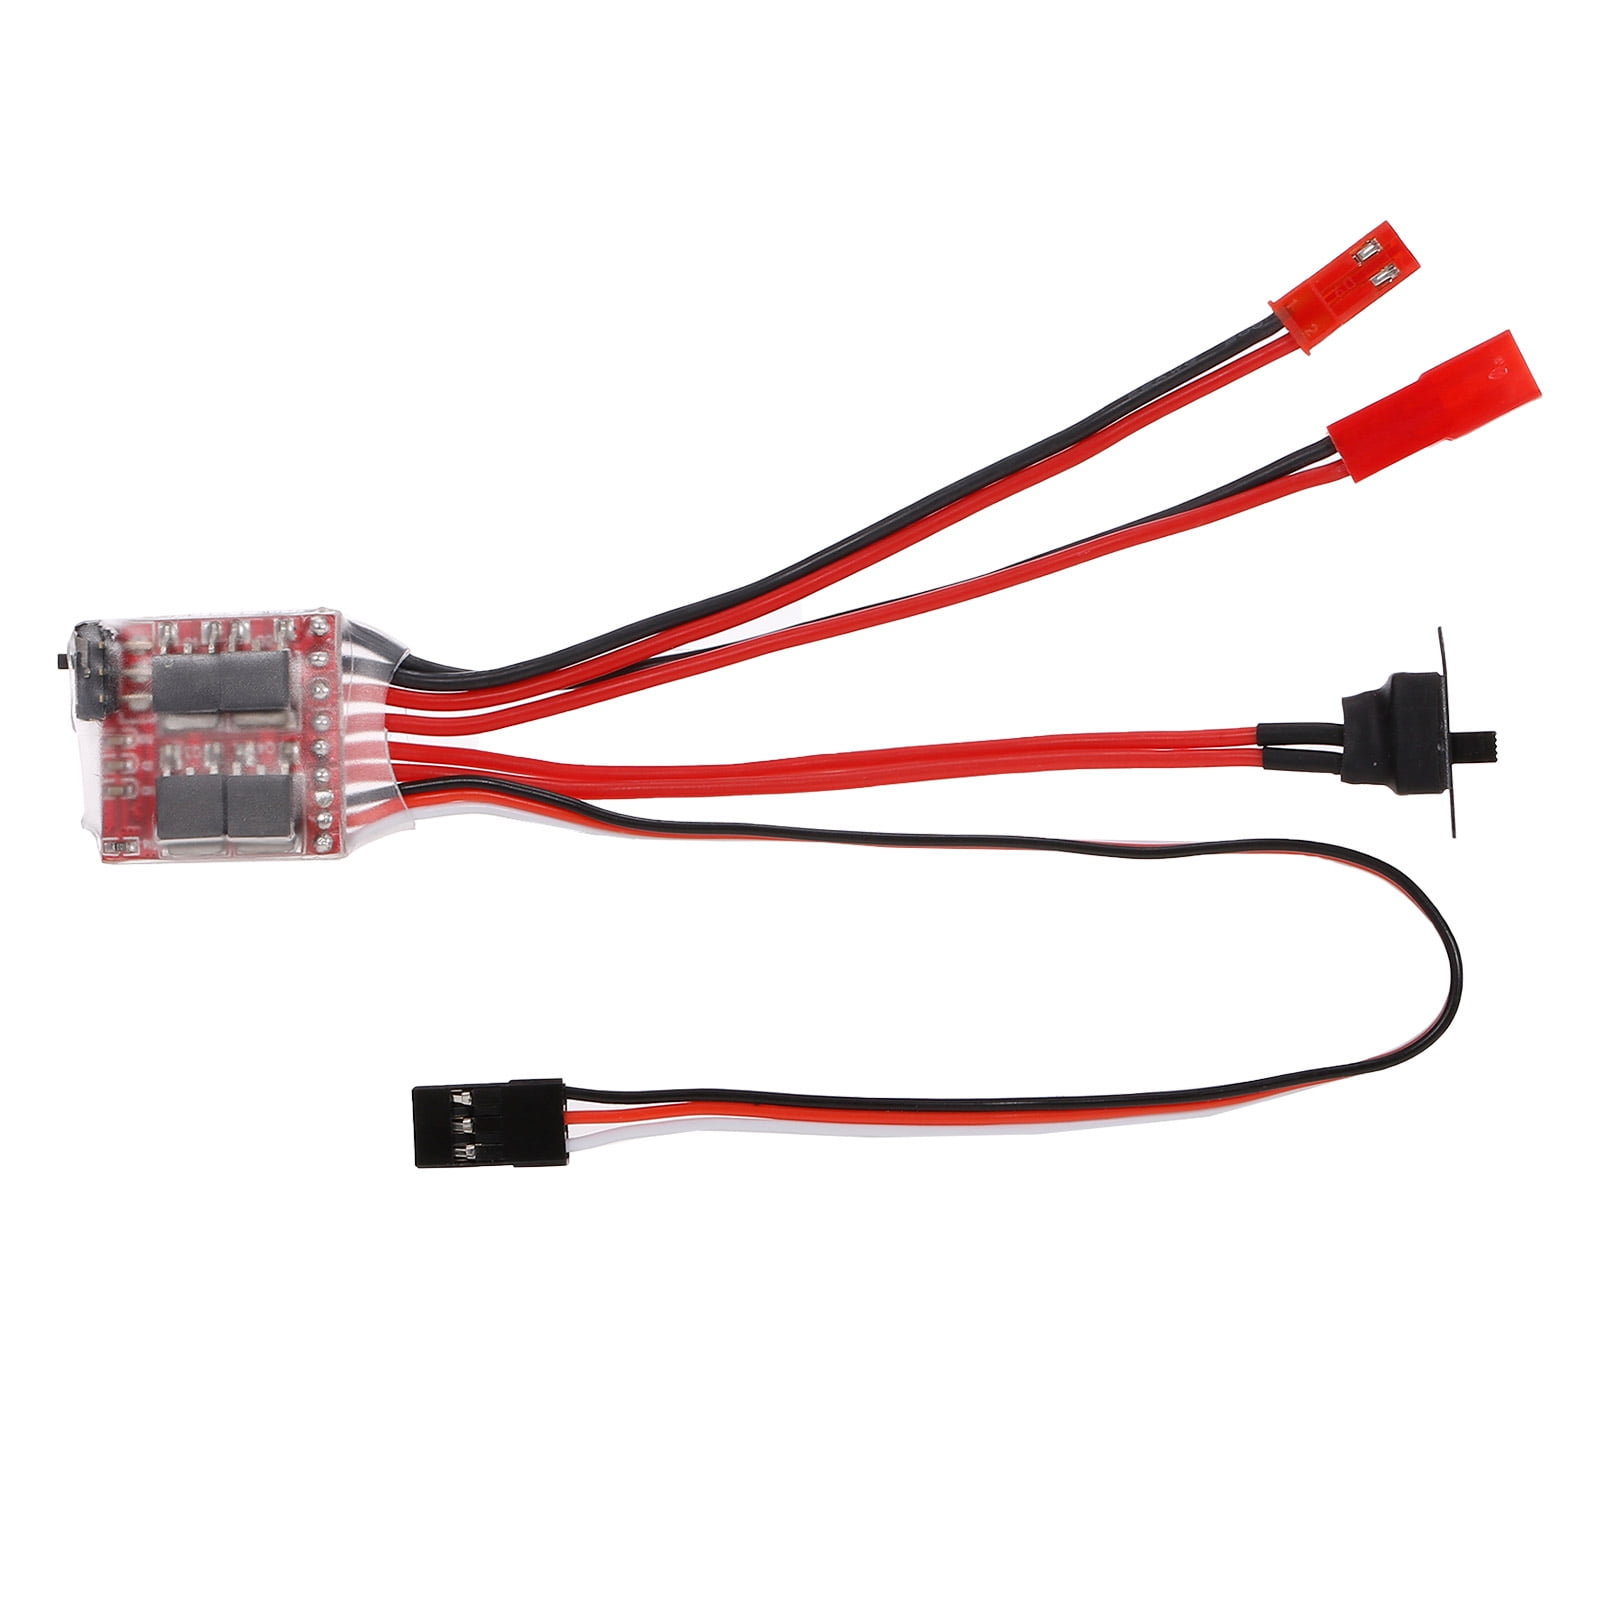 3pcs RC Brushed 10A ESC Two Way Motor Speed Controller No Brake For 1/16 1/18 